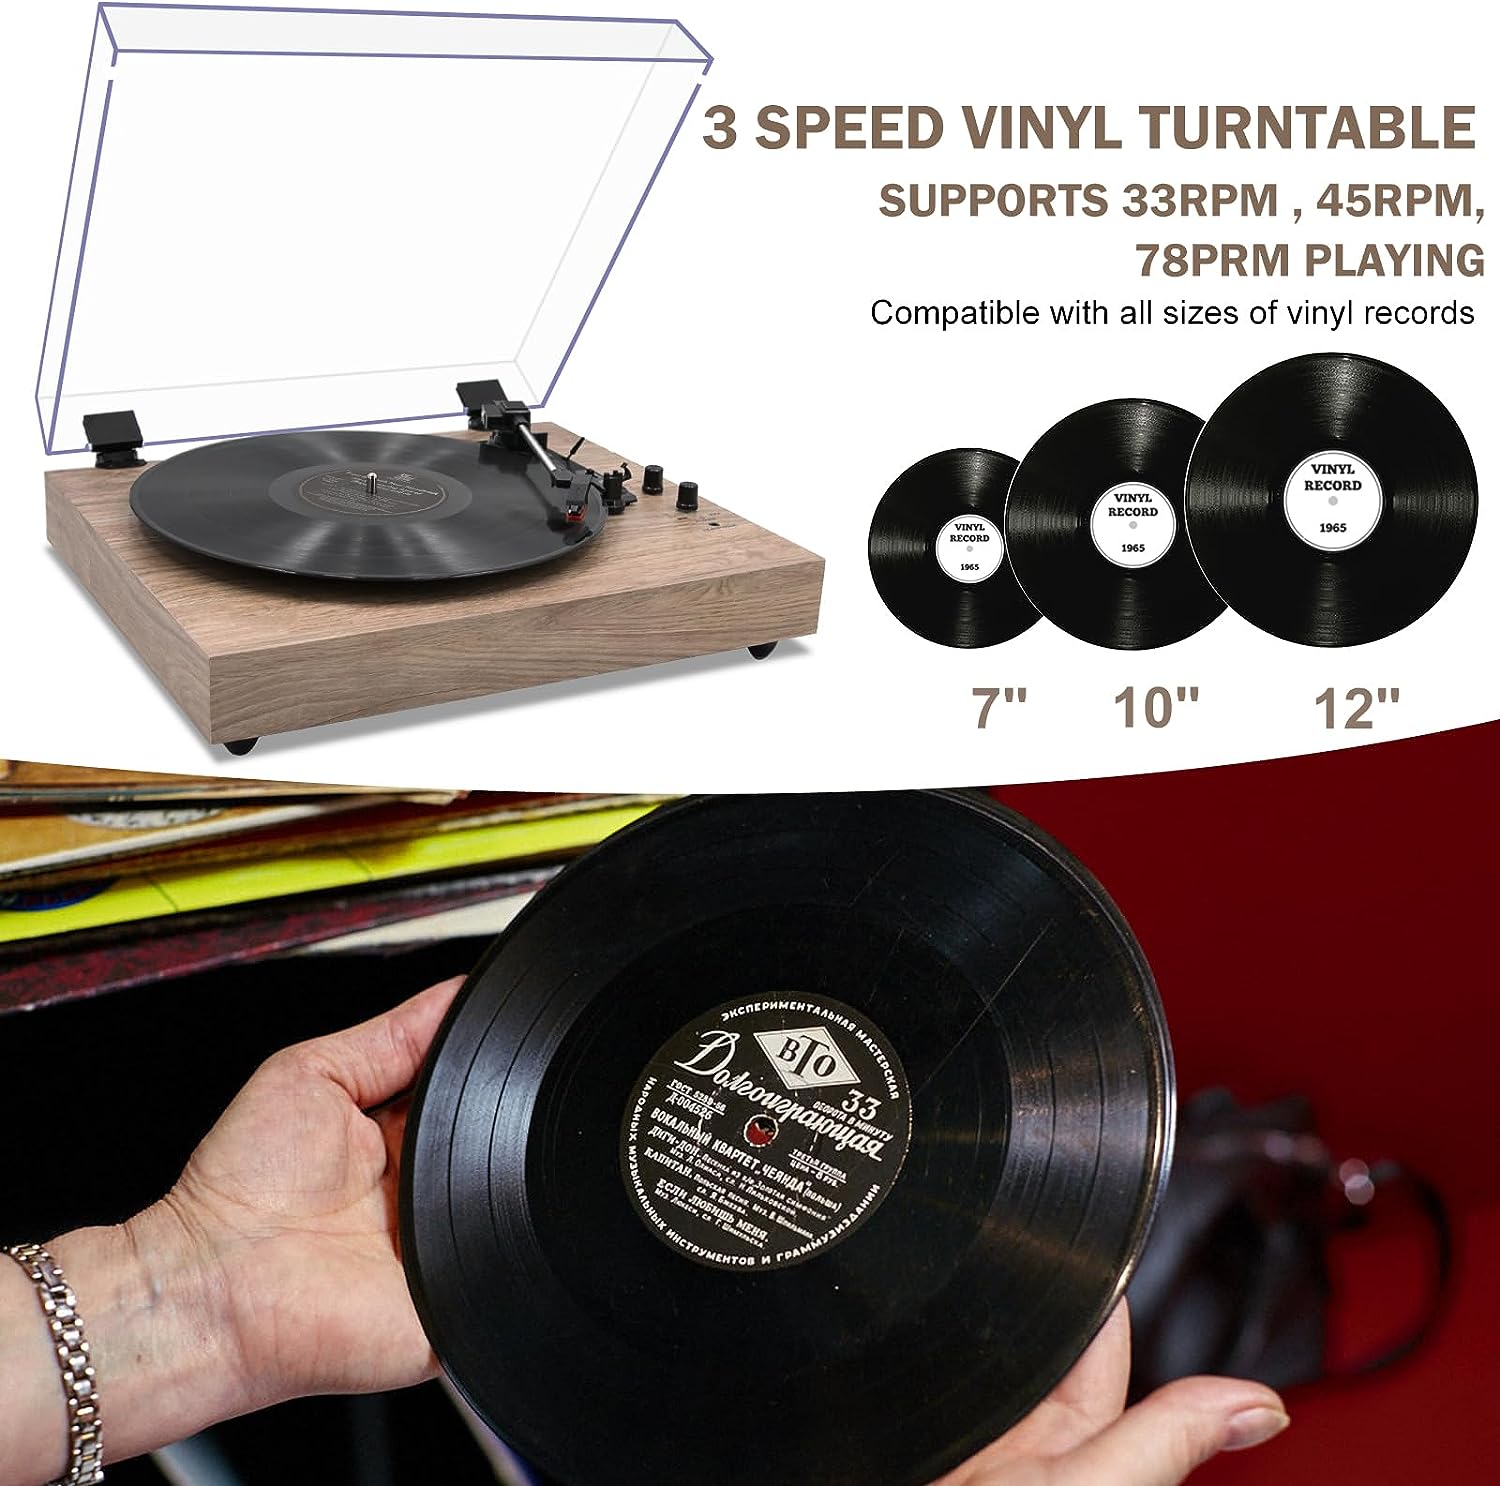 Vintage 3-Speed Turntable Bluetooth Input Record Player Vinyl Record Player with Twin Built-in Stereo Speakers,Auto Stop,RCA Output, Full Size Platter,Acrylic Dust Cover,White Leather